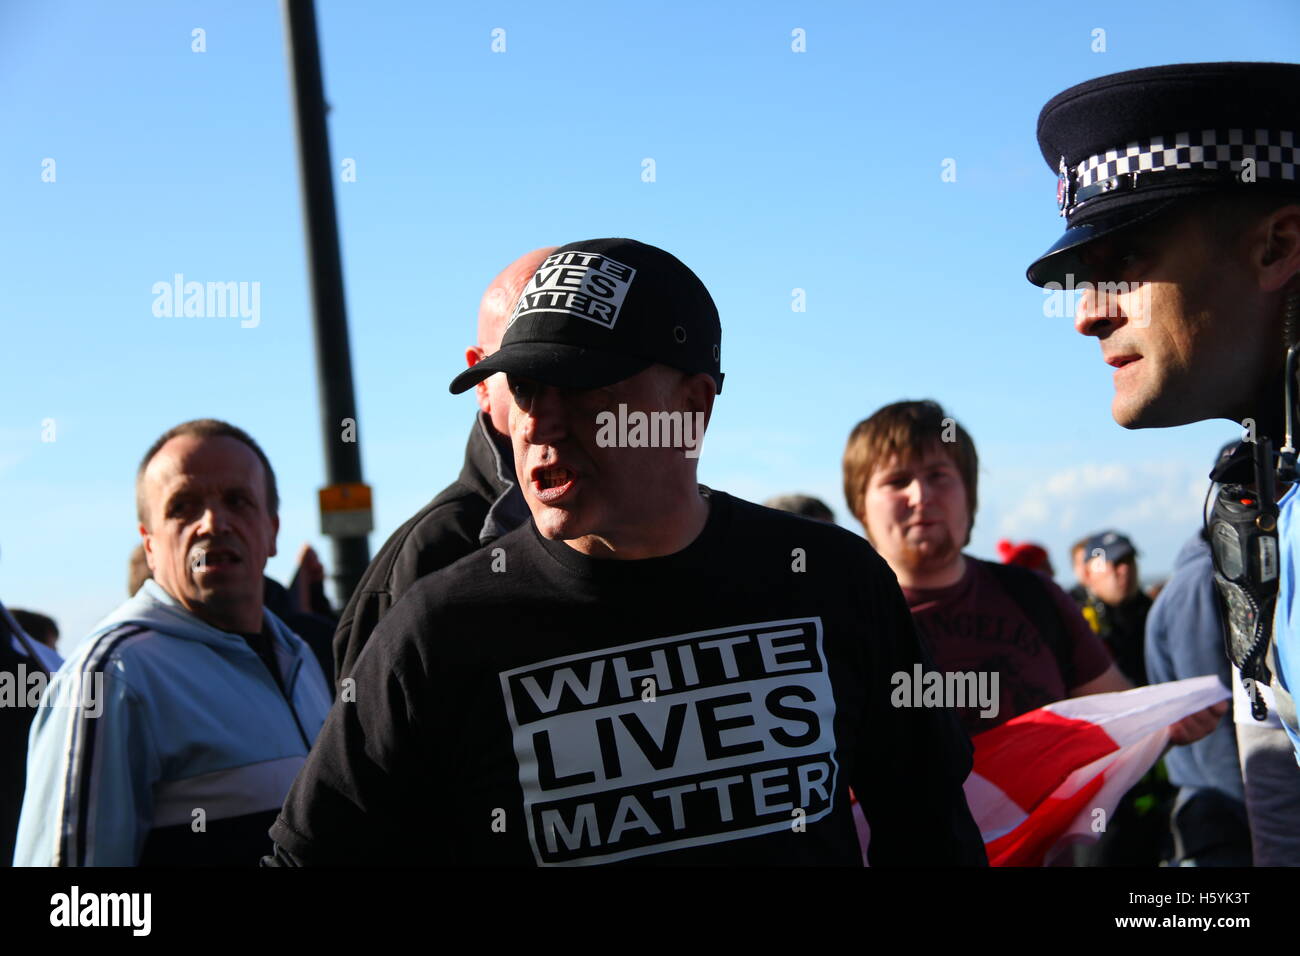 Margate, Kent, UK. 22nd October, 2016. A man with white lives matter shirt. The right wing group White Lives Matter (WLM) march in the town. This is the first WLM demonstration in the UK. A counter demonstration, Margate Rocks Against Racism (MRAR) is taking place in the town at the same time. Penelope Barritt/Alamy Live News Stock Photo